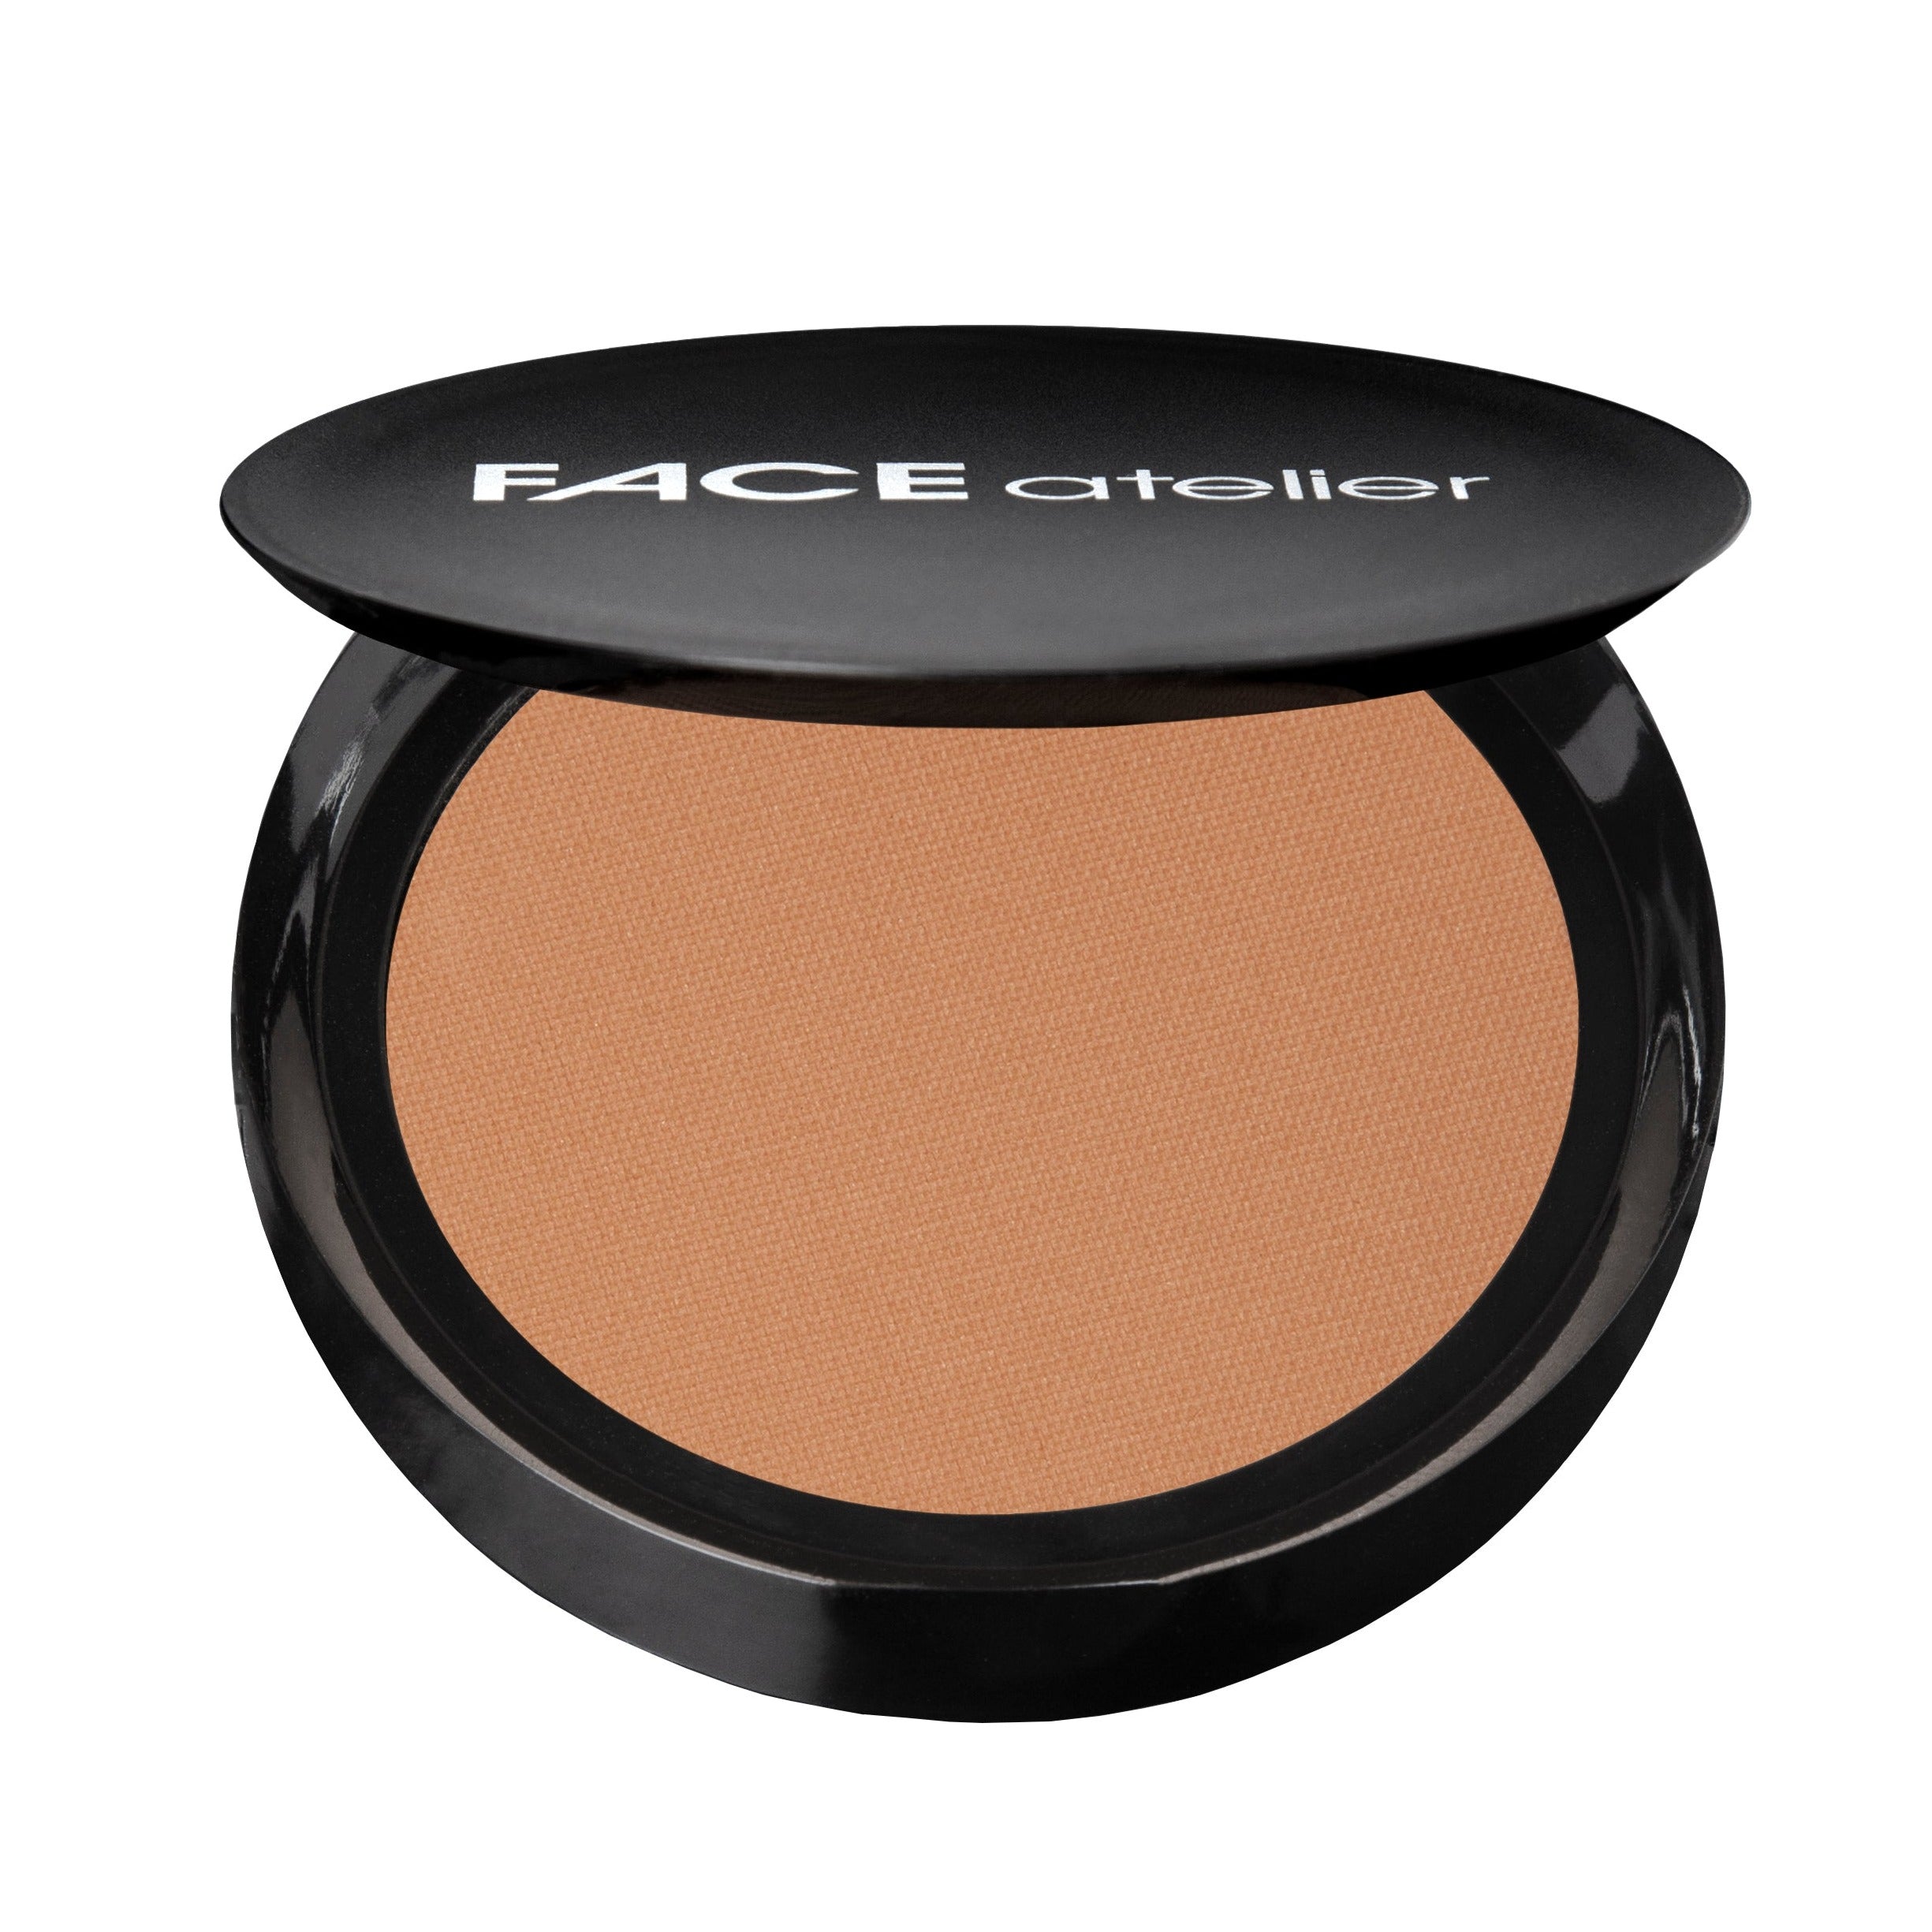 FACE atelier Ultra Bronzer - Brushed Sable